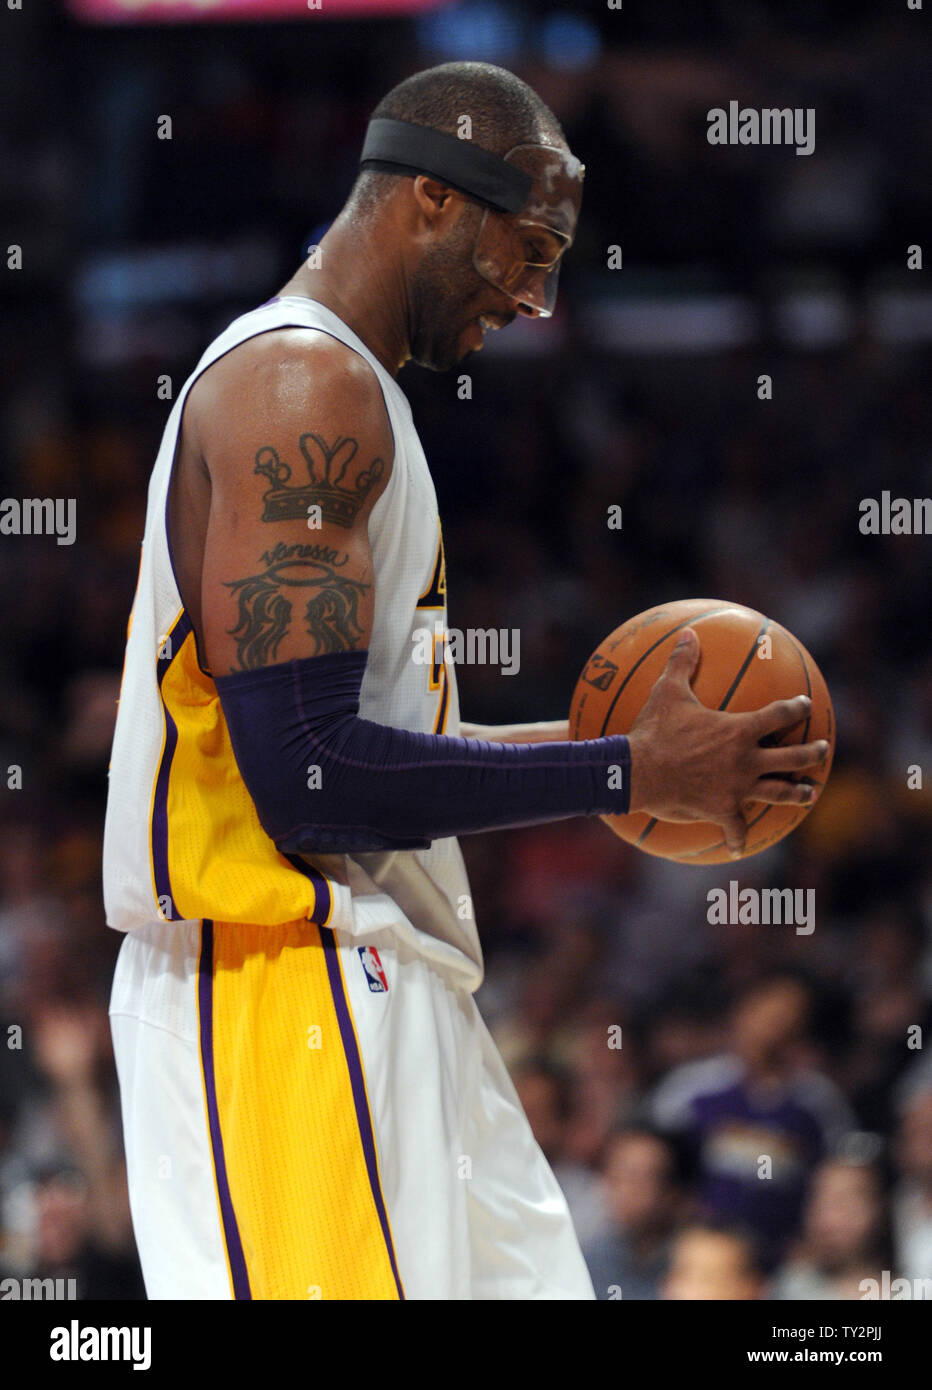 Los Angeles Lakers shooting guard Kobe Bryant (24) reacts after have the ball stolen by Miami Heat point guard Mario Chalmers (15) in the second half of  their NBA basketball game in Los Angeles on March 4, 2012.  The Lakers won 93 to 83.  UPI/Lori Shepler Stock Photo